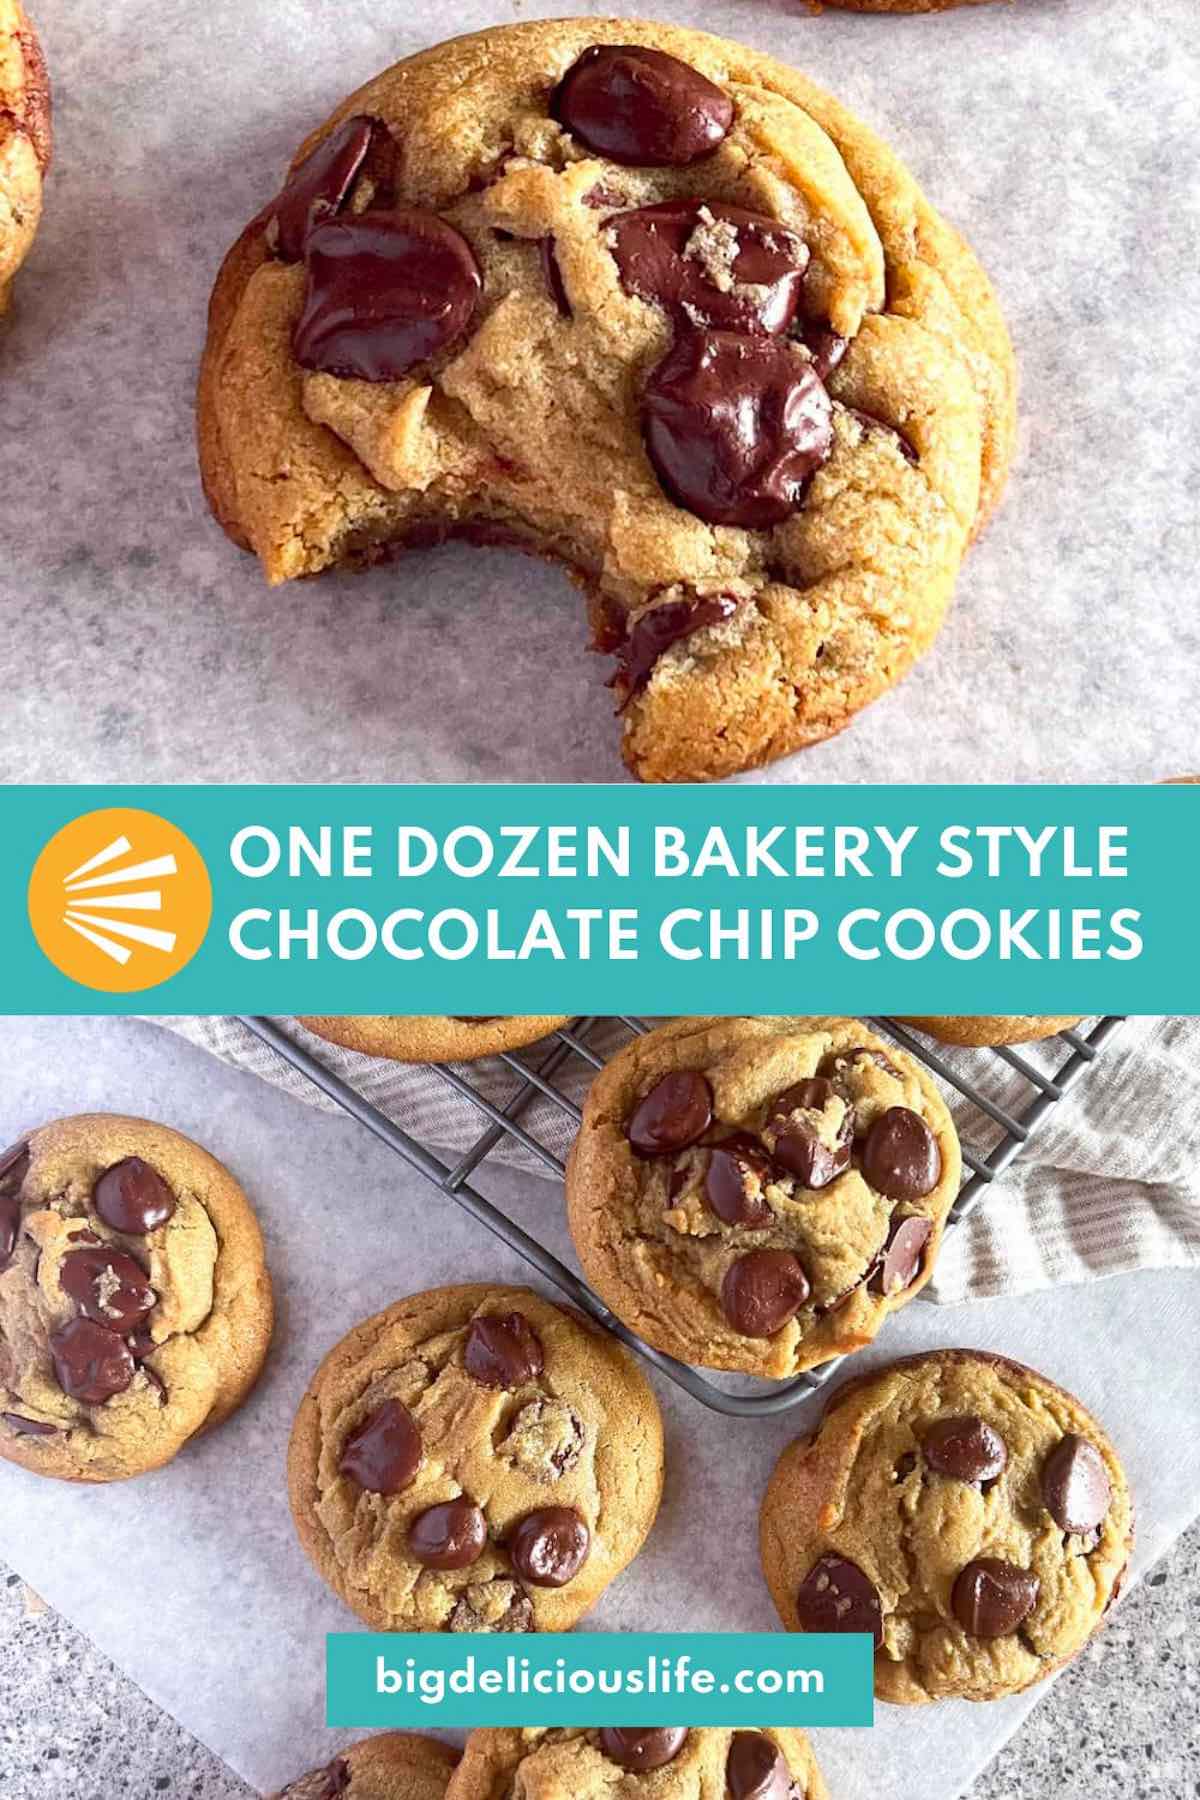 Branded pinterest template with photos of bakery style chocolate chip cookies.